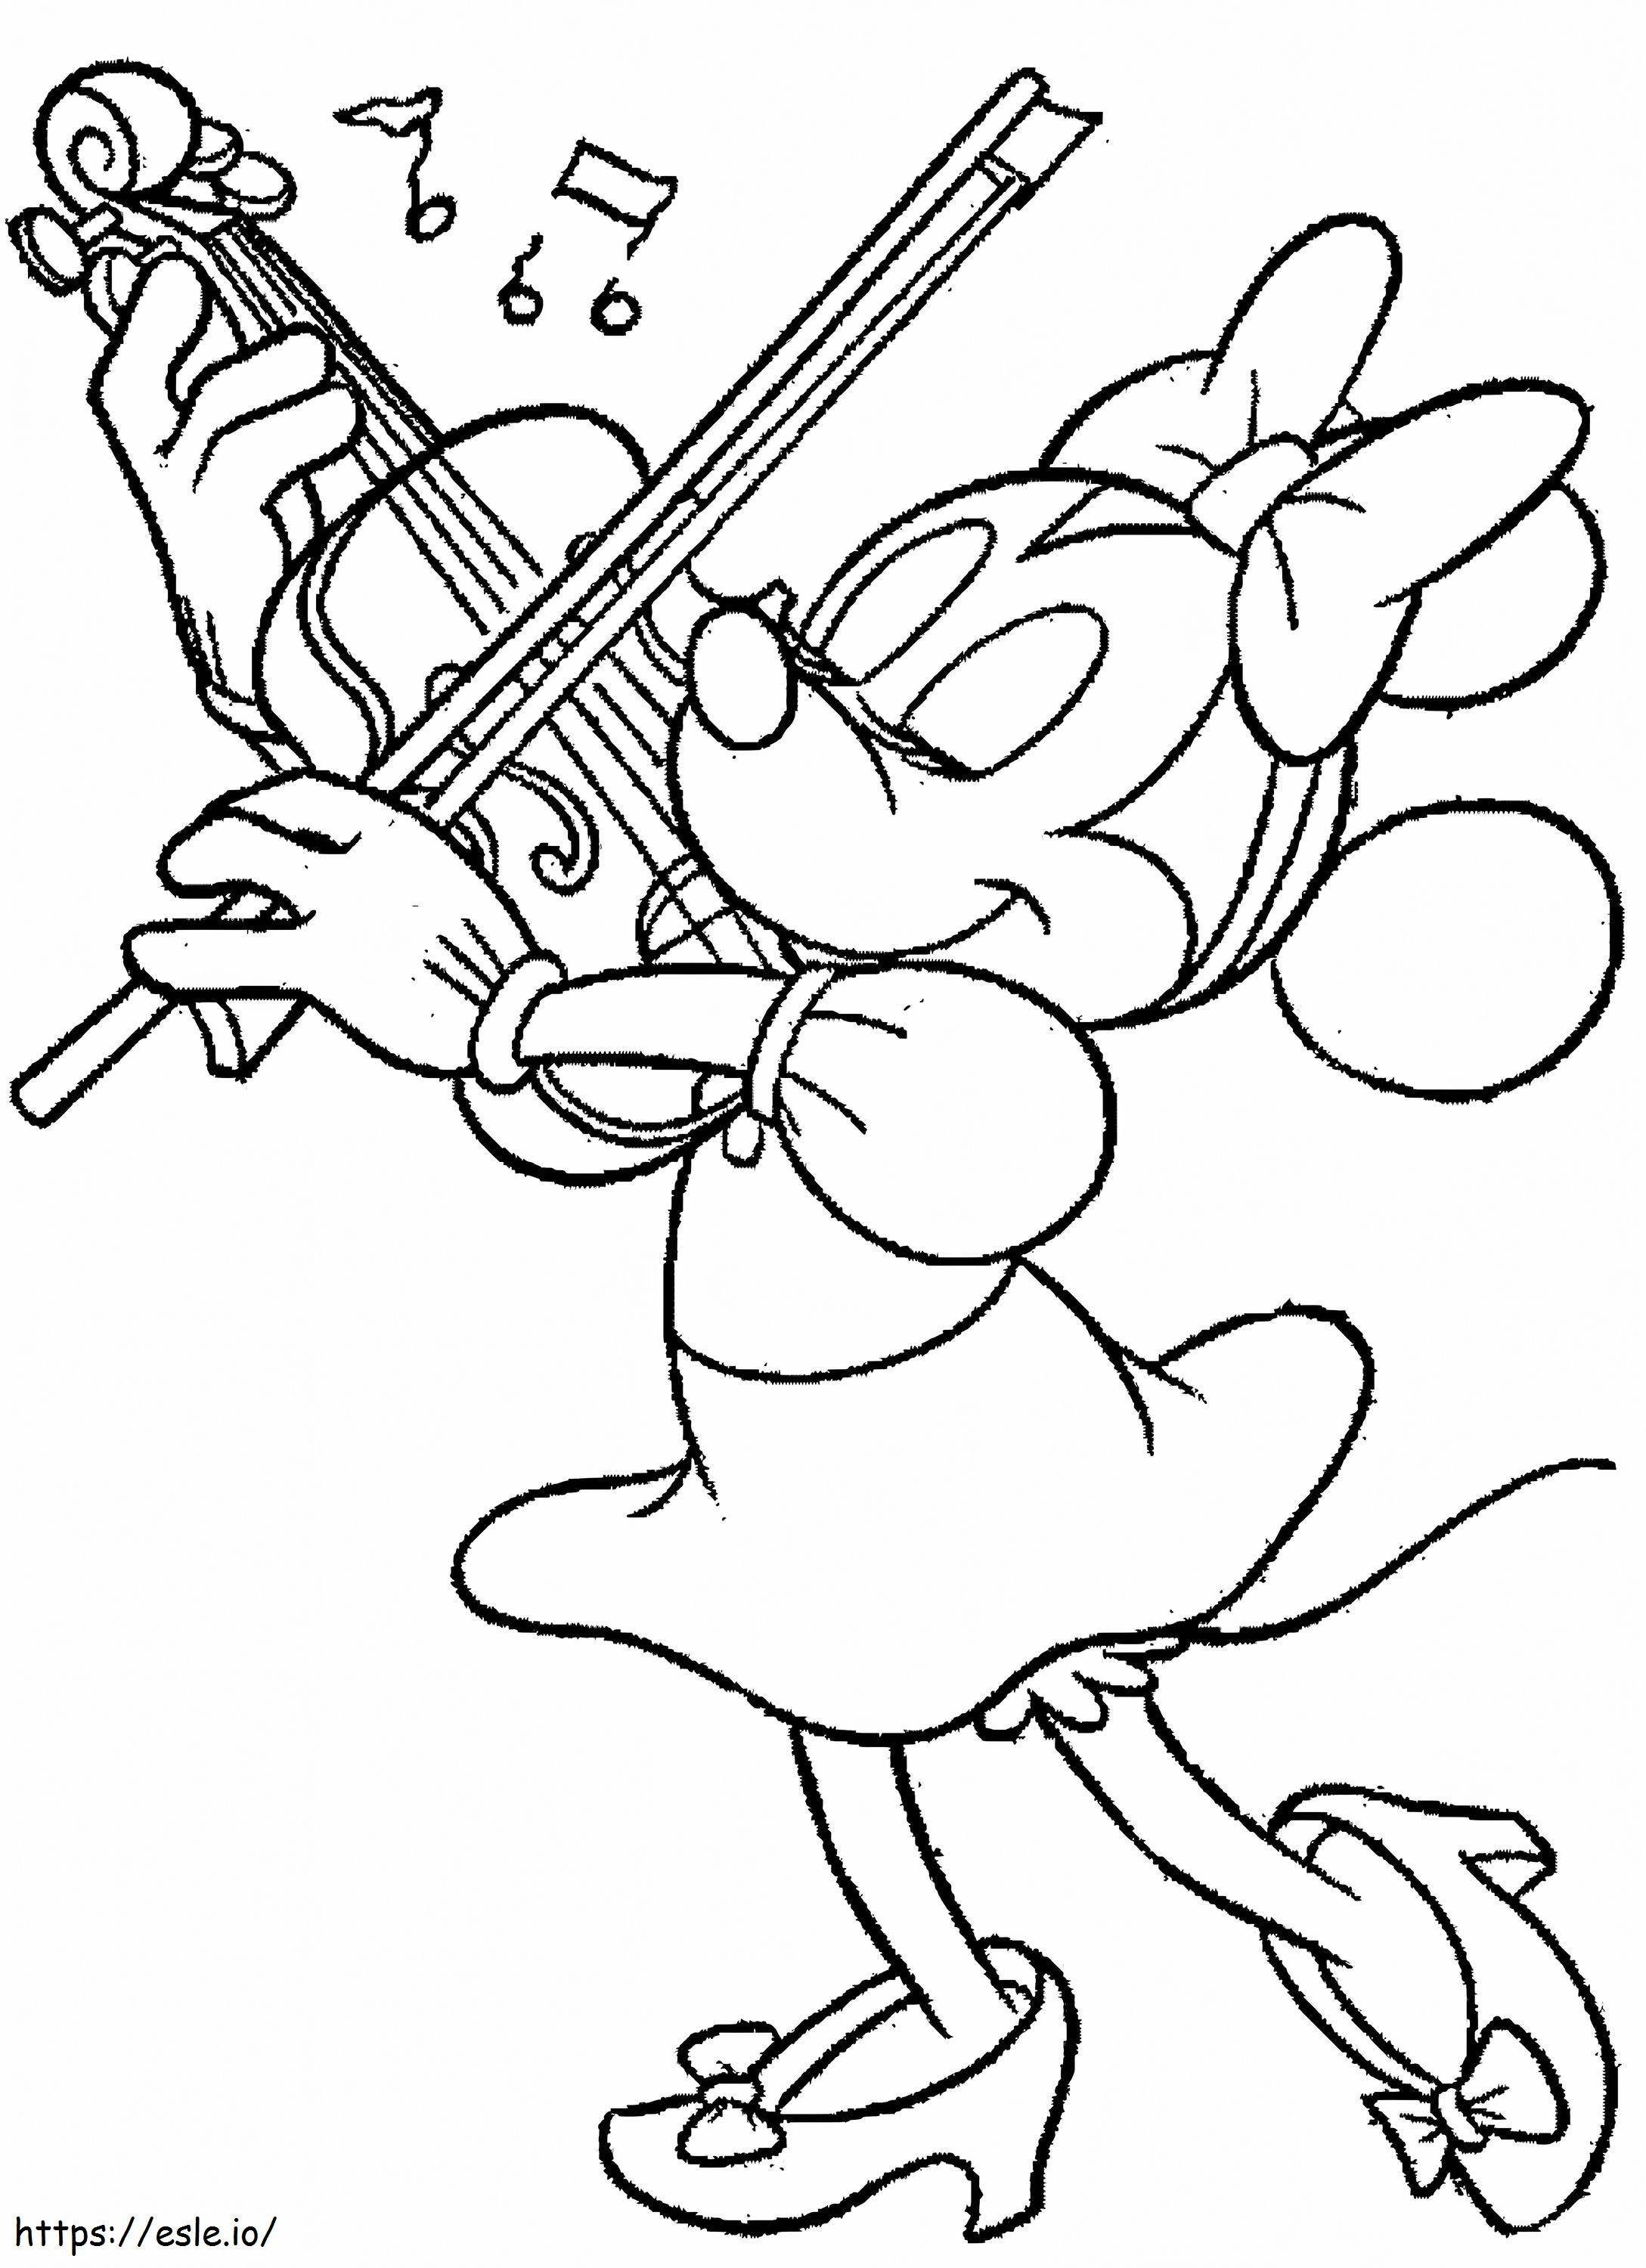 Minnie Mouse Playing The Violin coloring page